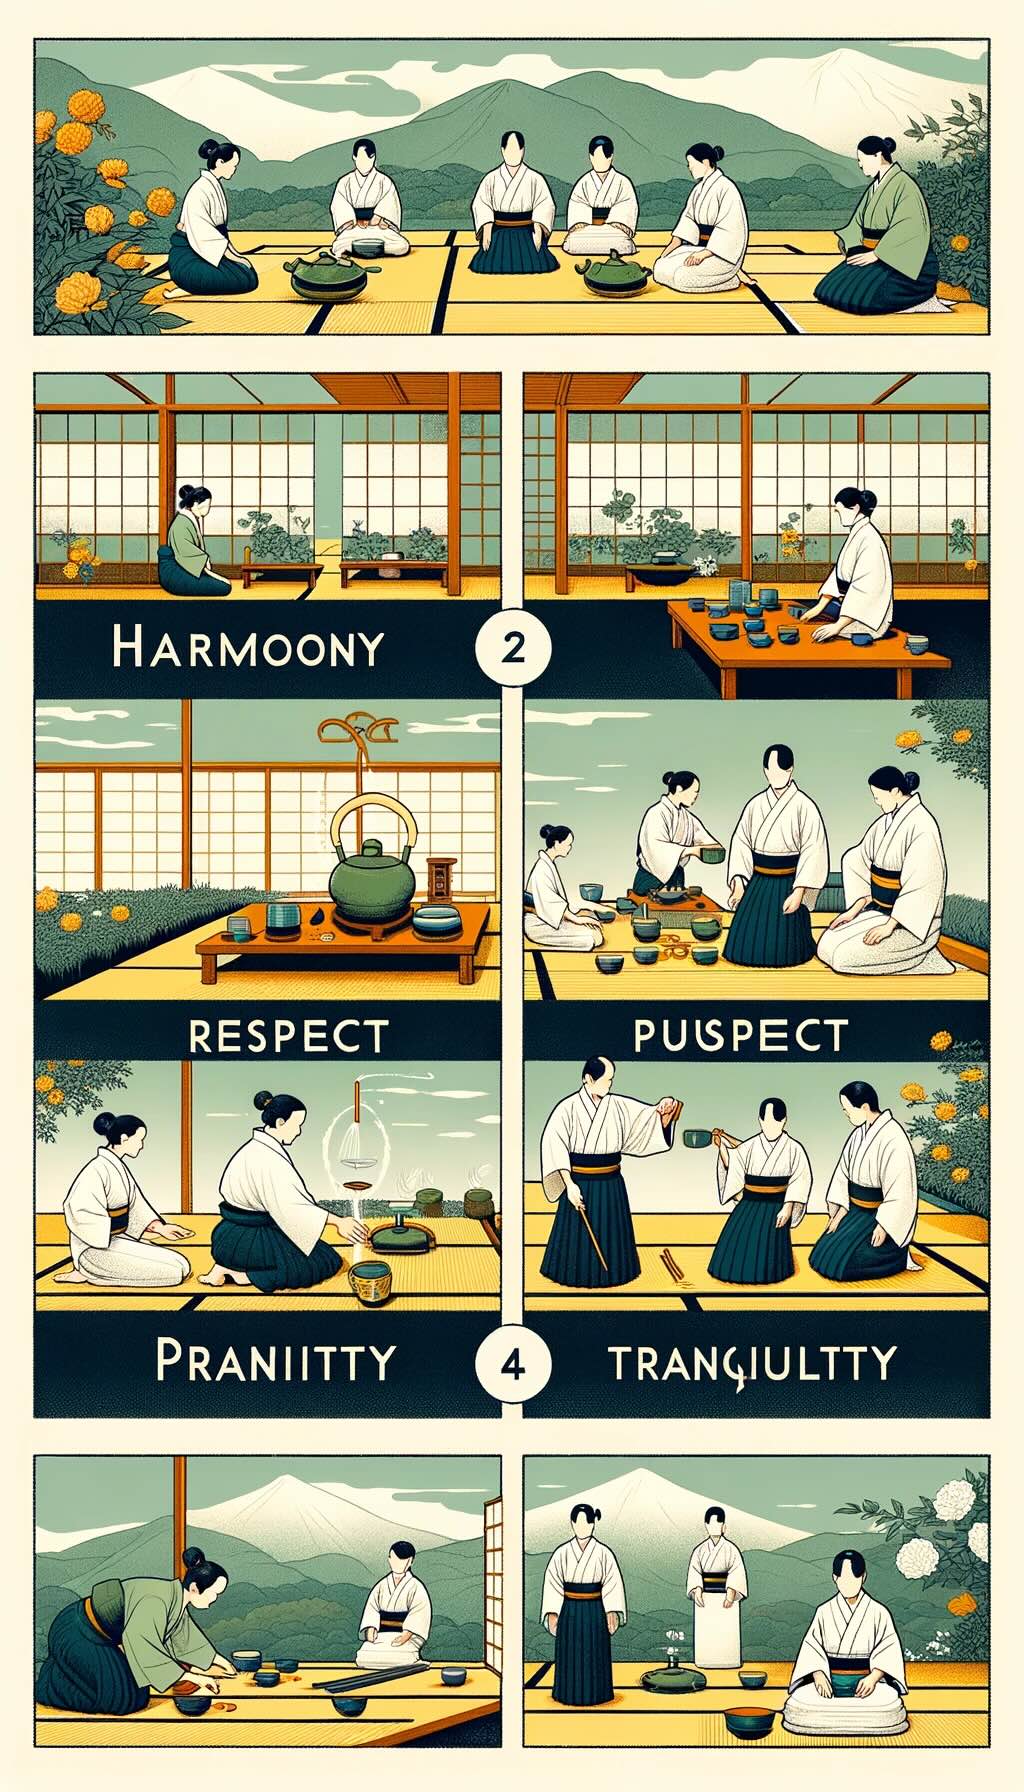 The Four Principles: Harmony (和), Respect (敬), Purity (清), and Tranquility (寂) - infographic 